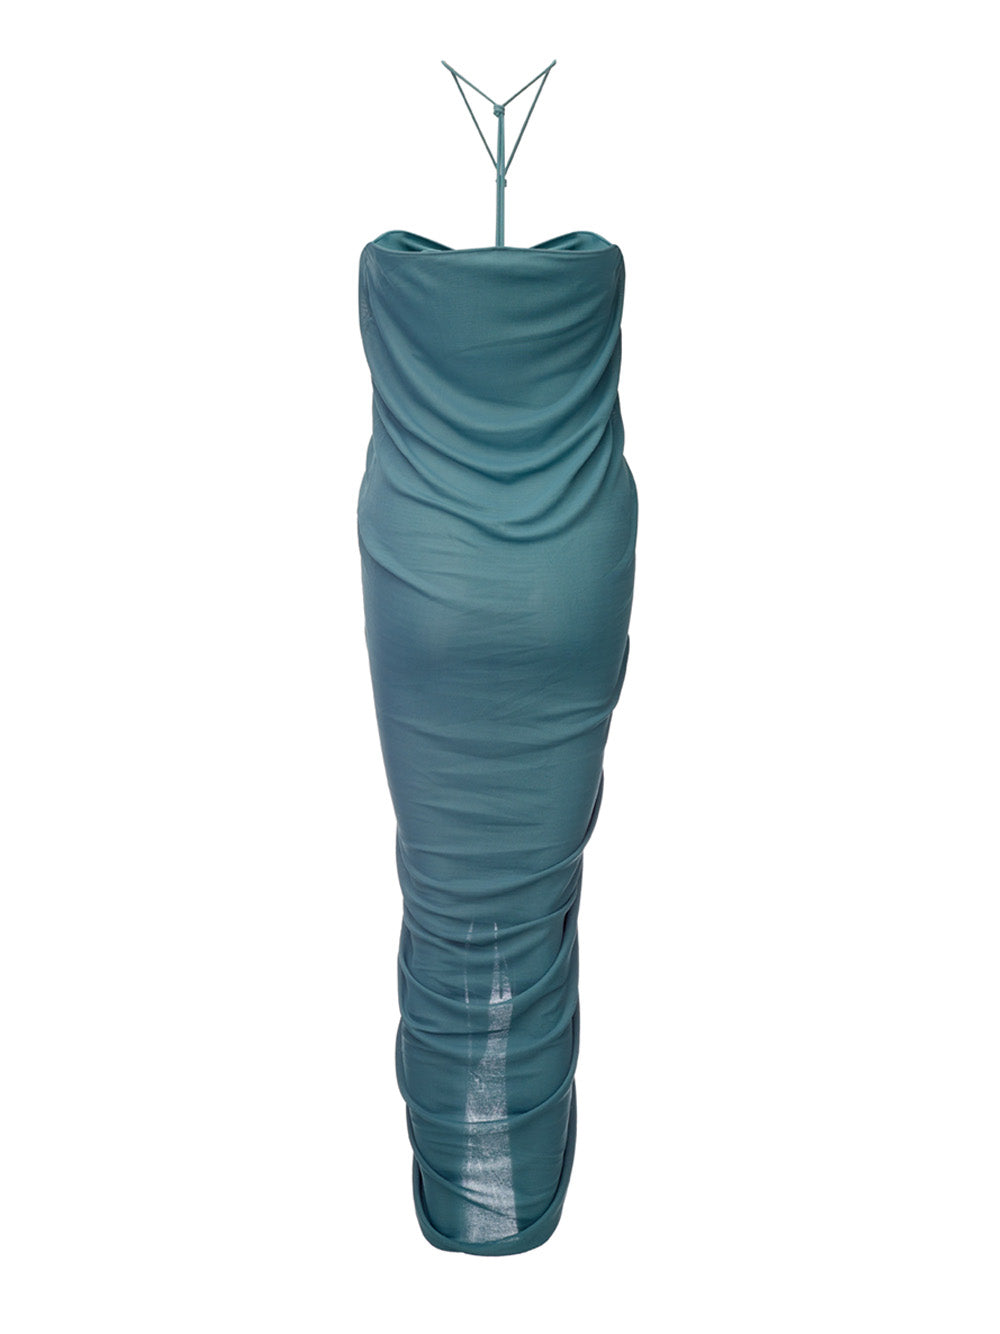 Glossy Viscose Dress with Draping Deatils